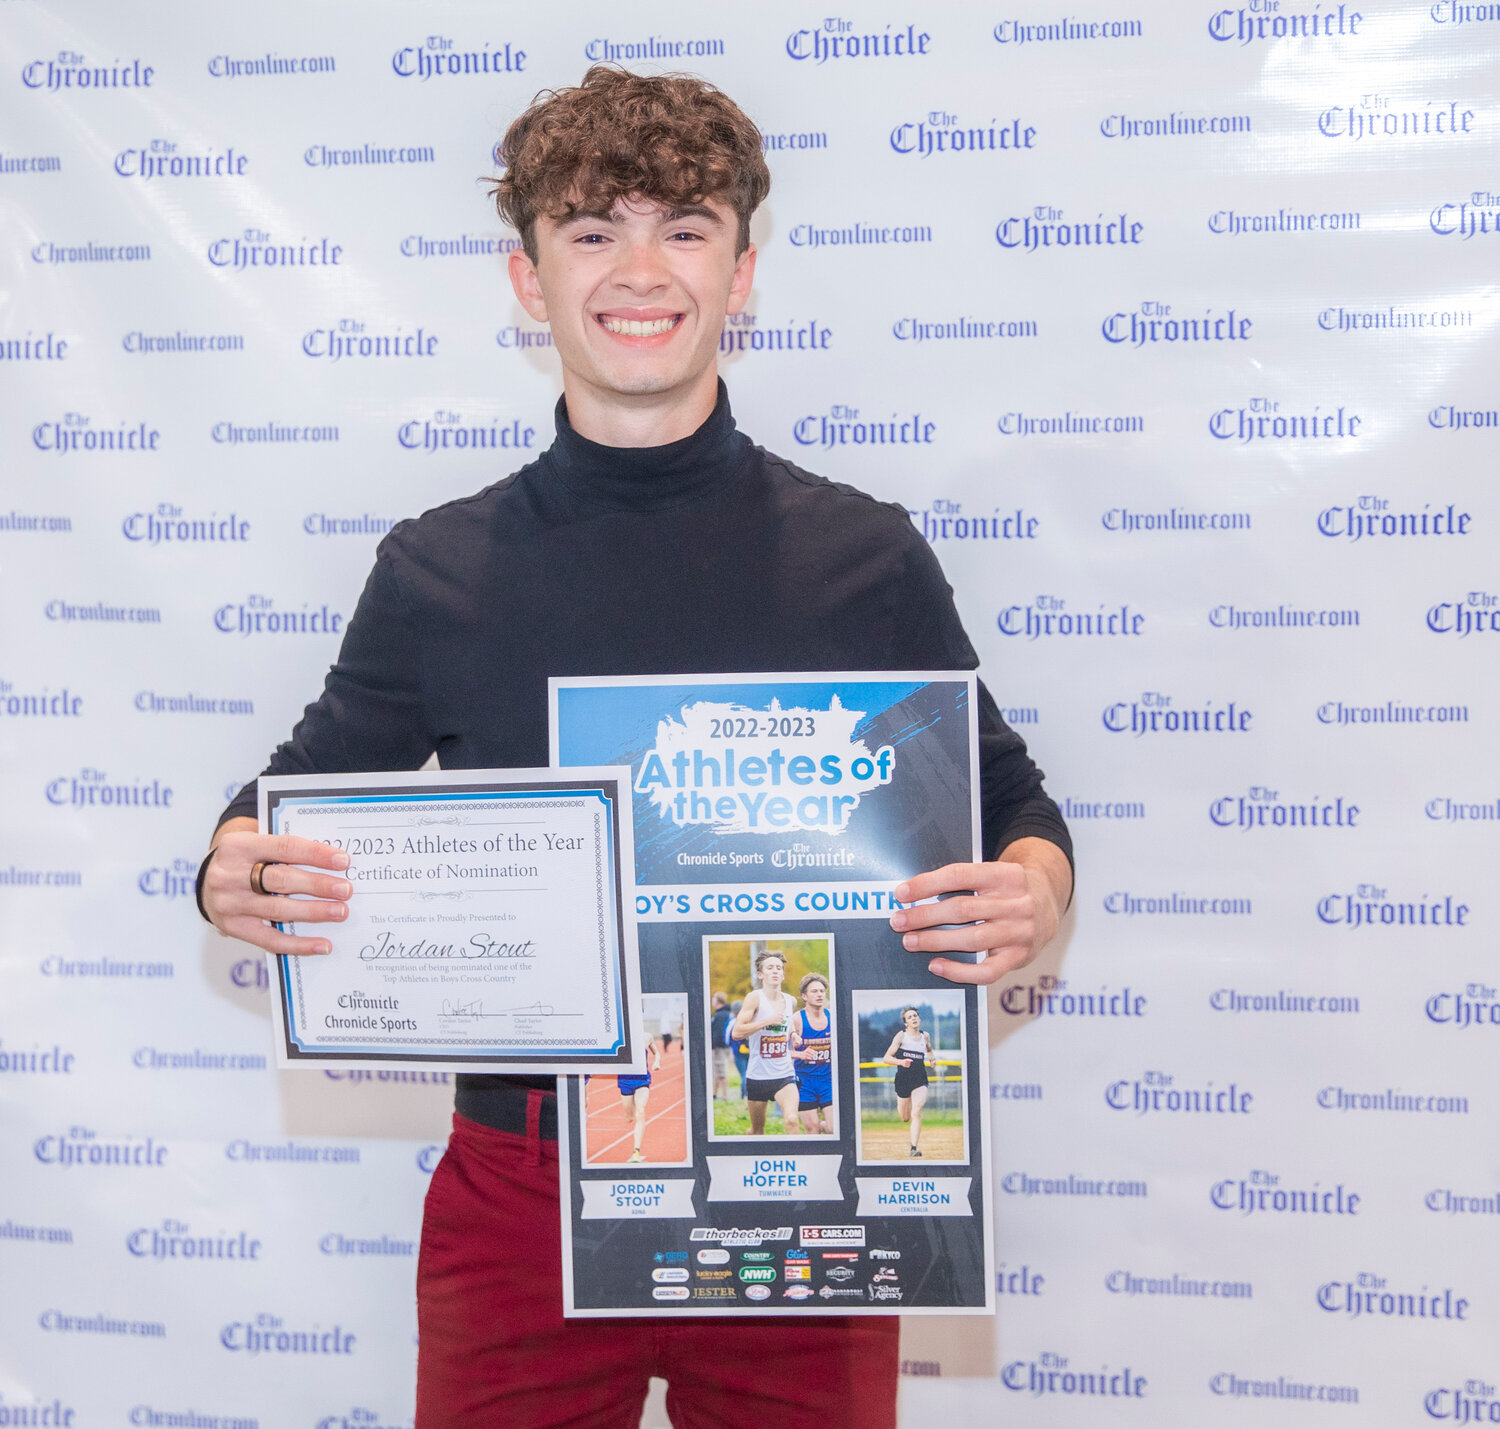 Adna’s Jordan Stout smiles for a photo Tuesday evening during the “Athletes of the Year” banquet at the Jester Auto Museum. Stout won the 1B/2B District 4 Title last fall in Rainier and finished fifth at the 1B/2B State Championships for cross country.